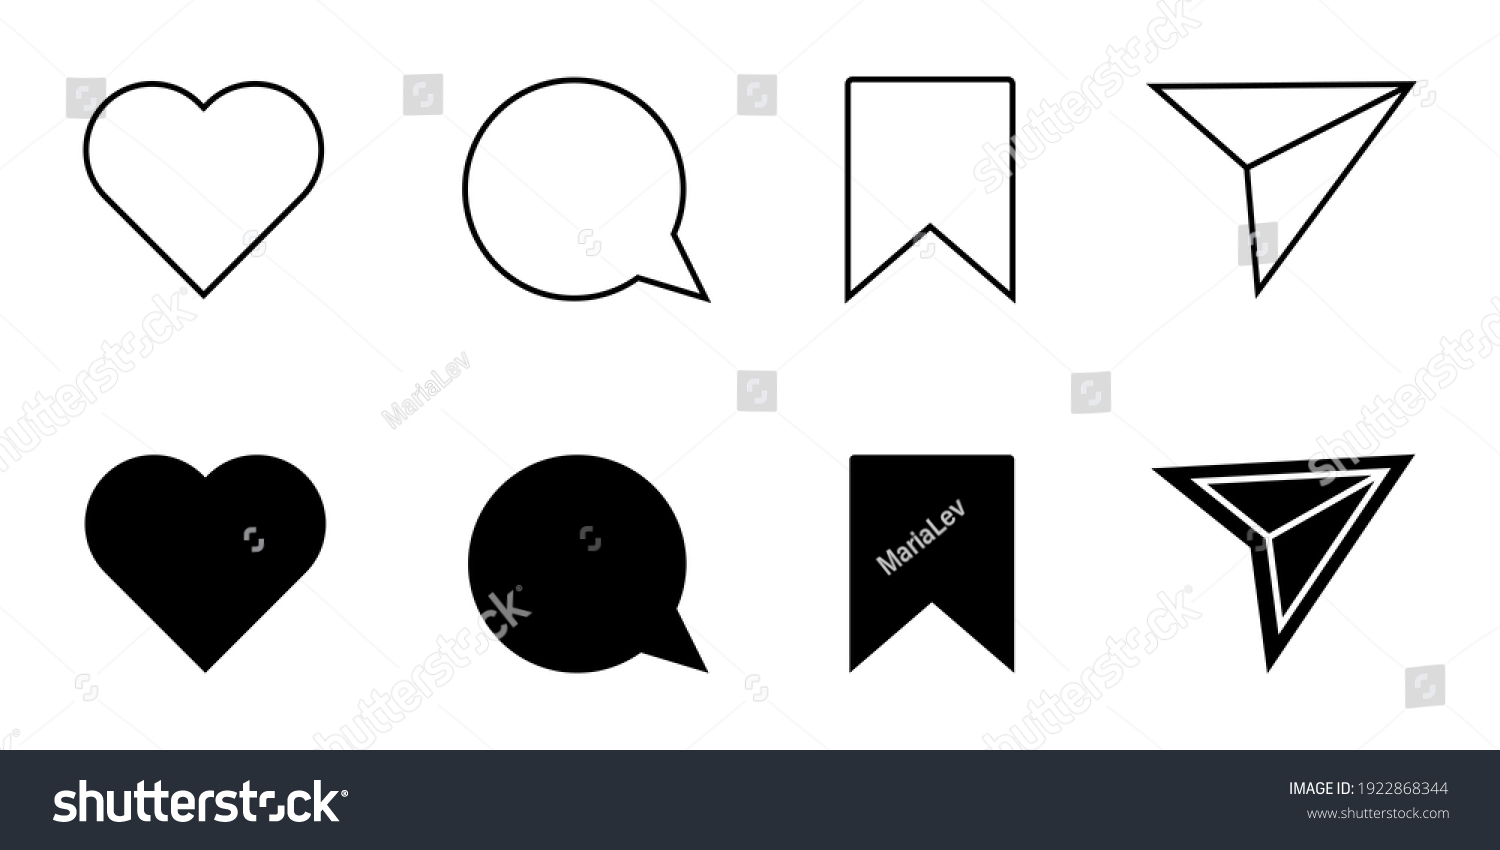 431,189 Share symbol Images, Stock Photos & Vectors | Shutterstock